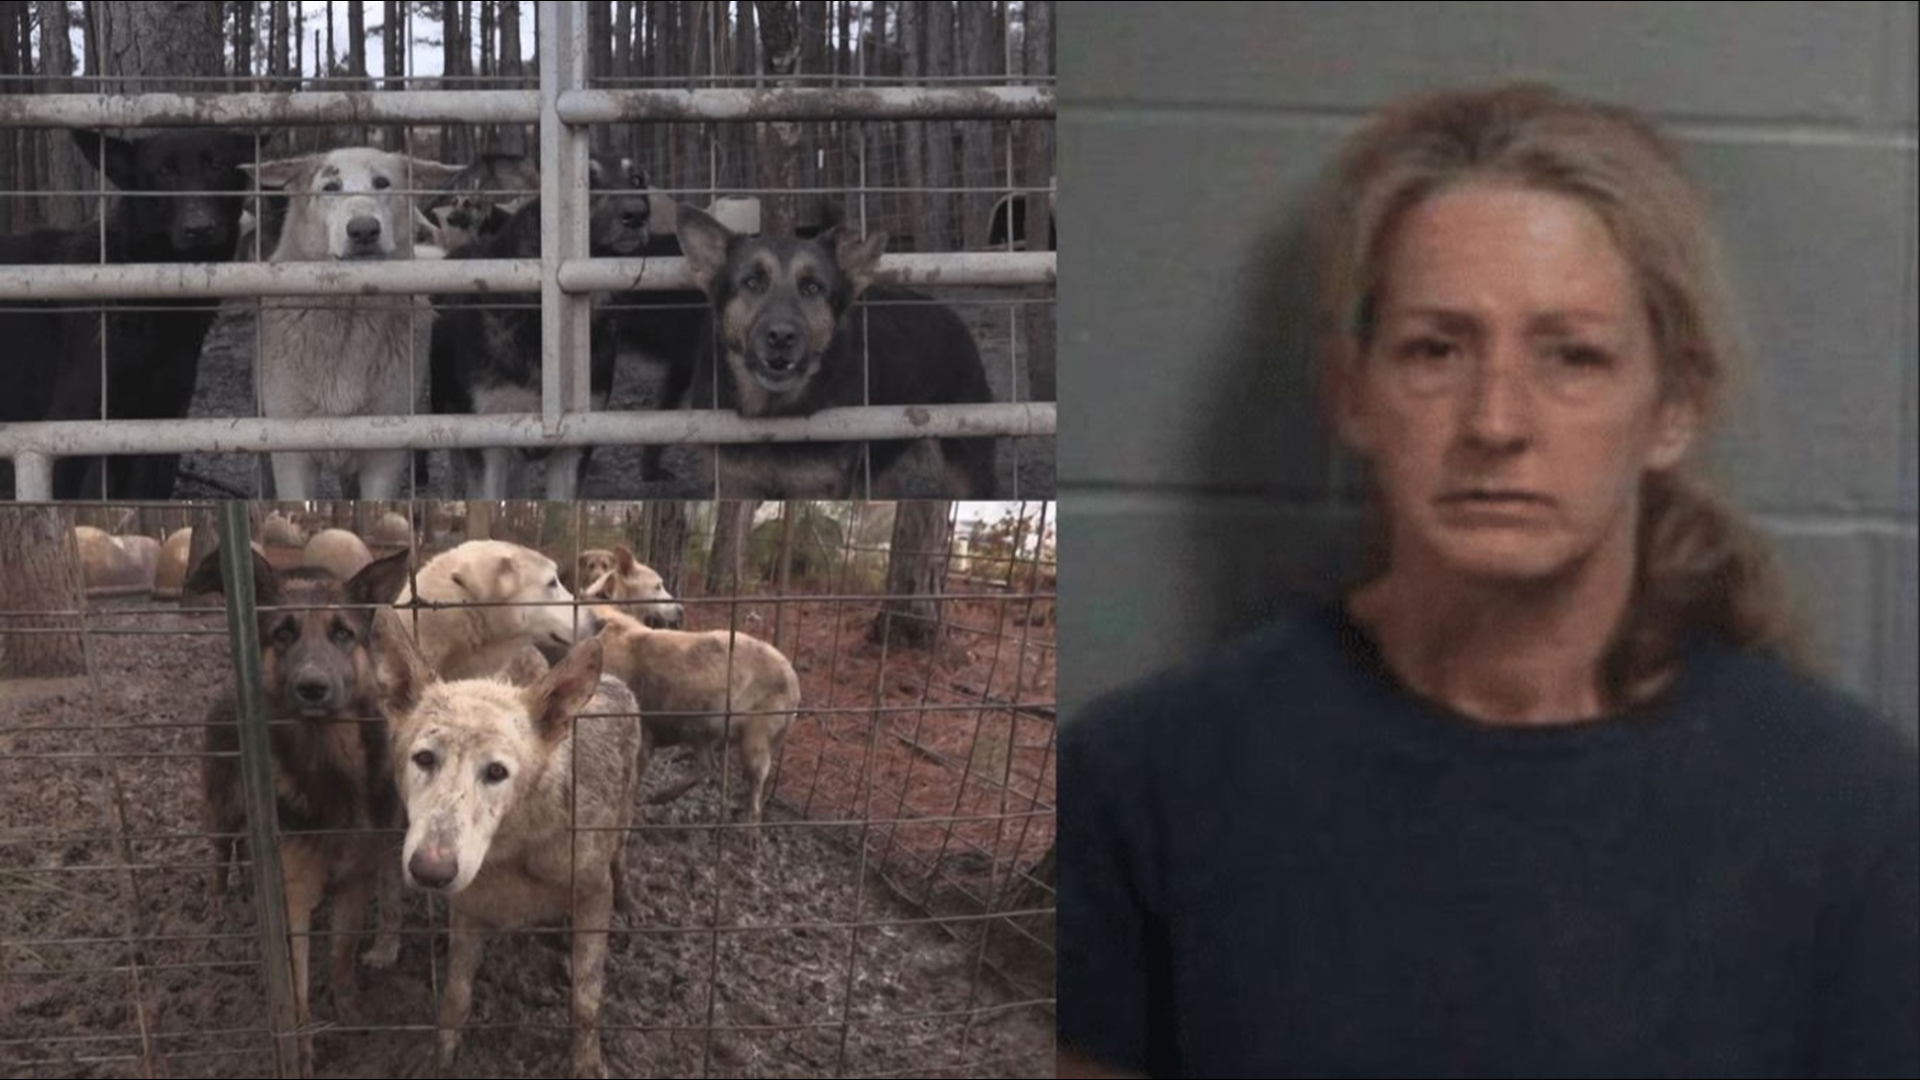 More than 150 dogs were found living in feces filled mud, killing each other to survive. It took dozens of volunteers to rescue them from Angela Powell's two properties. Now, eight months later, Montgomery County still has not filed any charges against Powell.